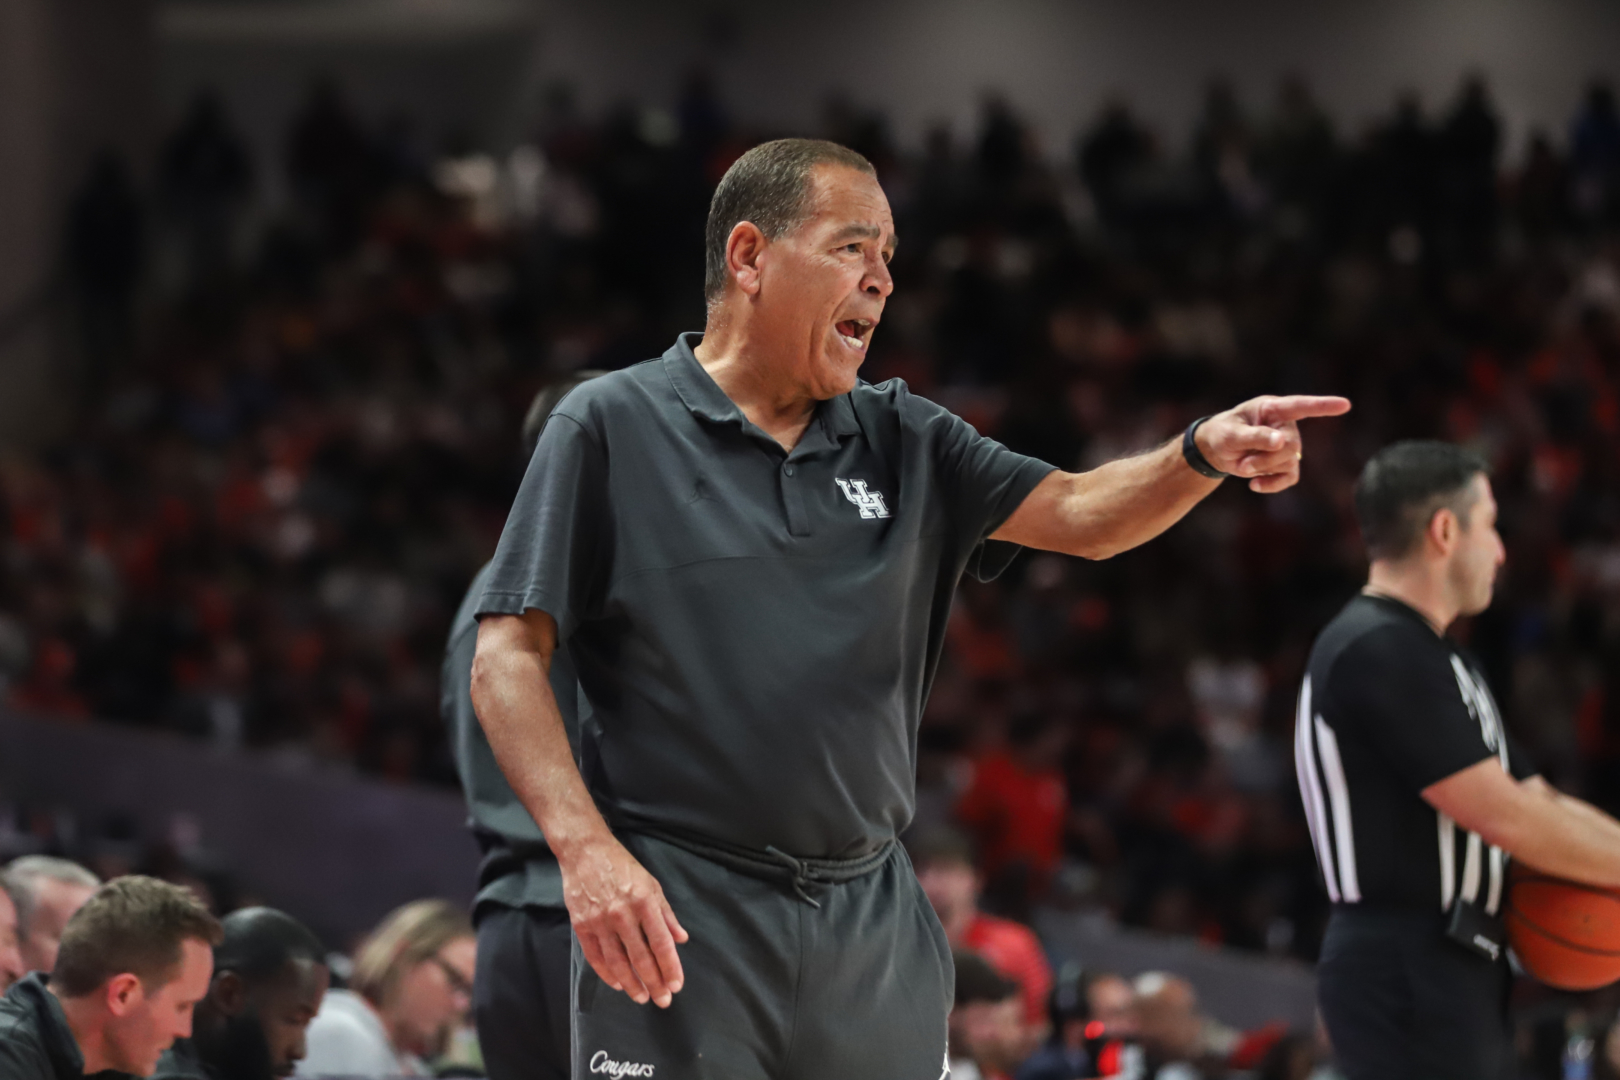 UH claimed the top spot in the AP Poll, giving Kelvin Sampson his first No. 1 ranking in his 34-year head coaching career. | Sean Thomas/The Cougar